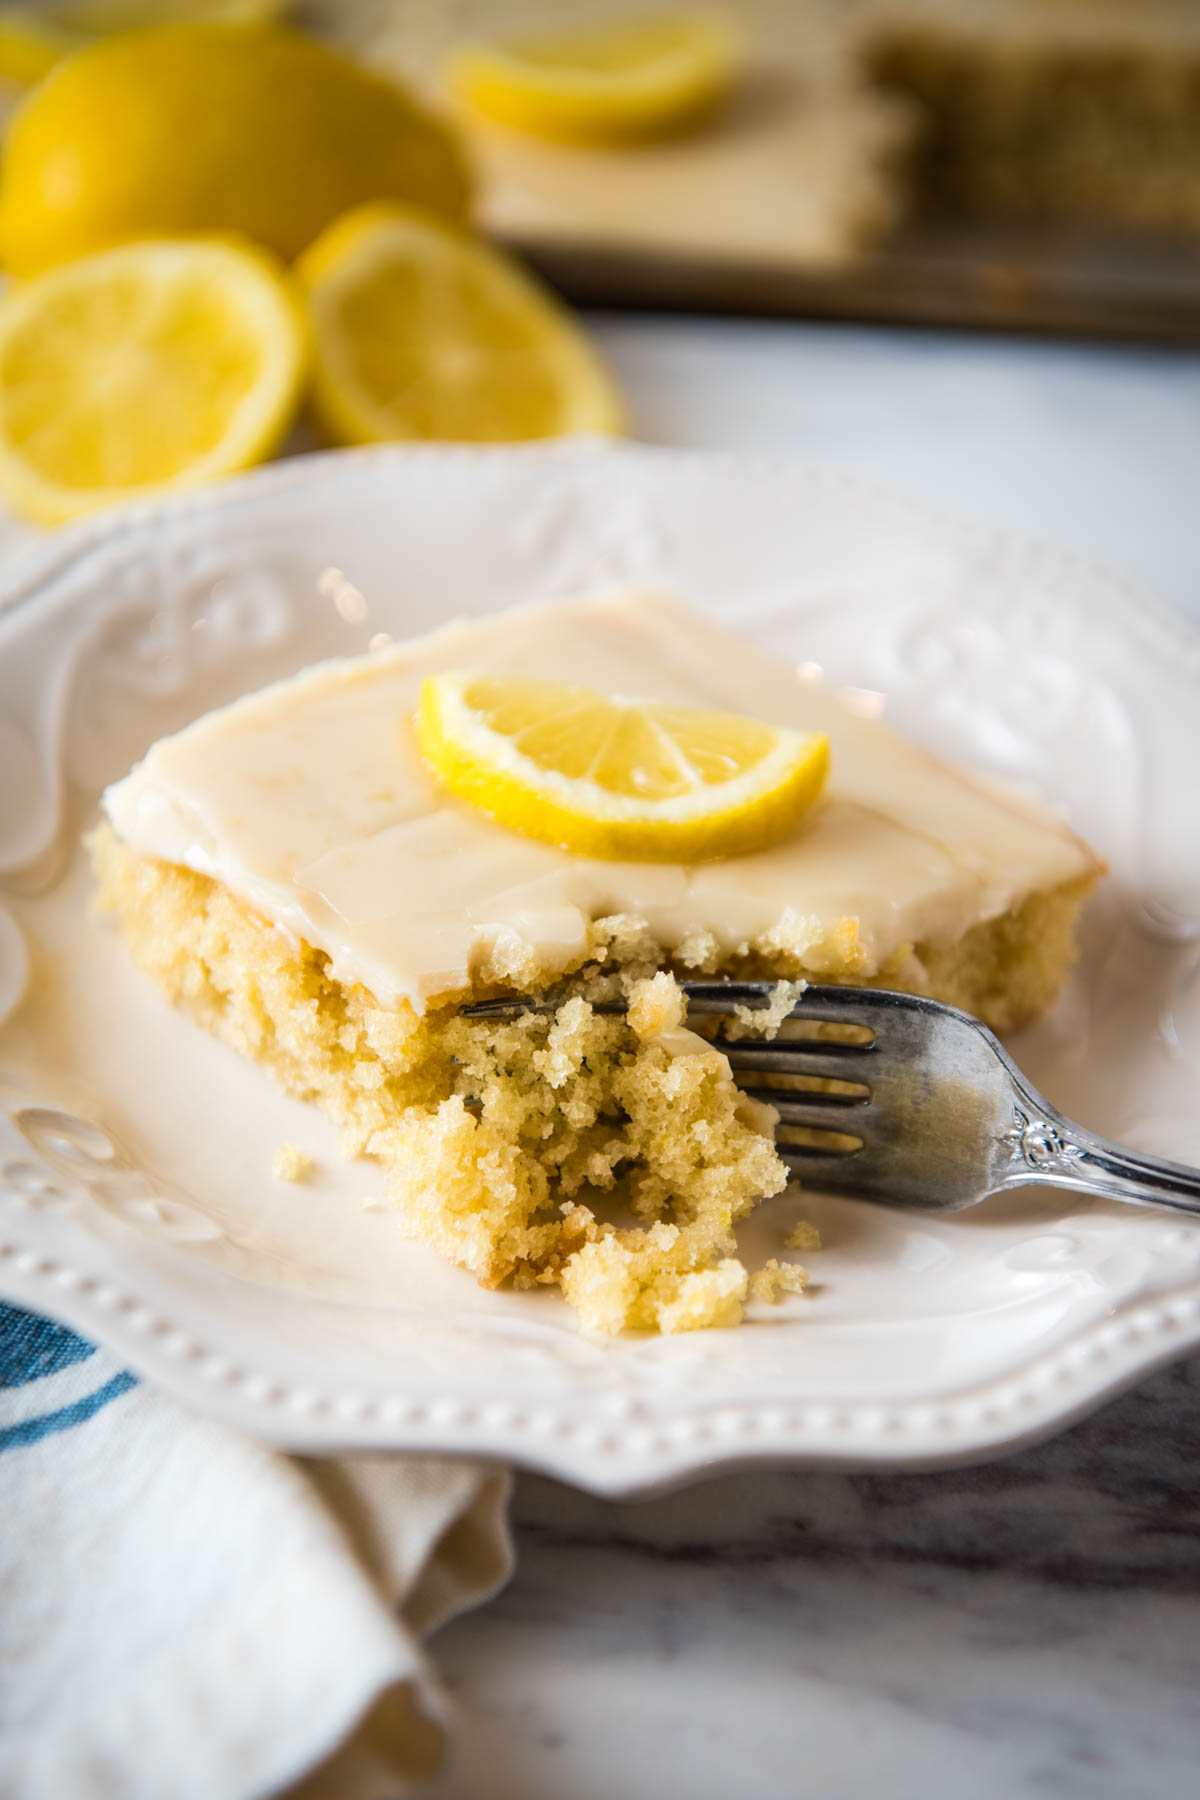 sliced square of lemon Texas sheet cake topped with cooked lemon frosting and a fresh lemon slice and with a bite taken out on a small white saucer